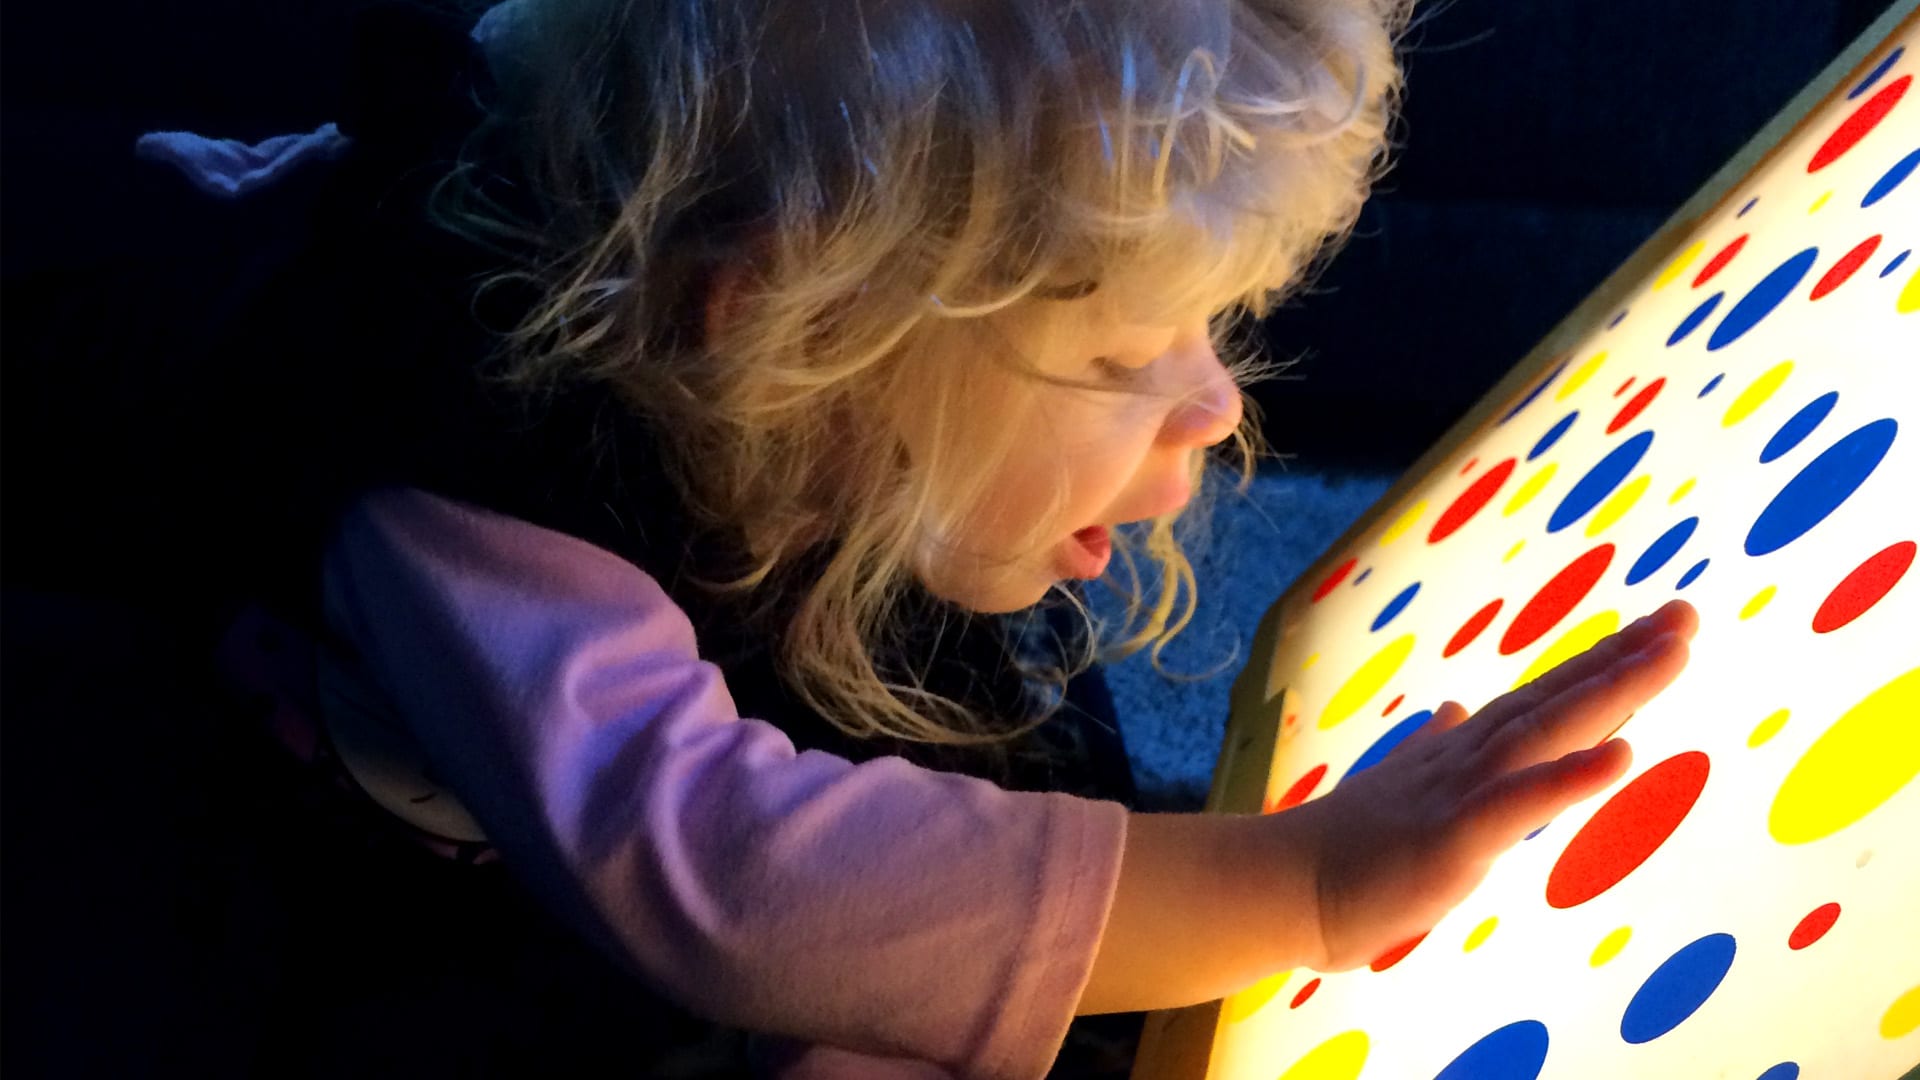 Young child playing with a light box showing red, blue, and yellow polka dots